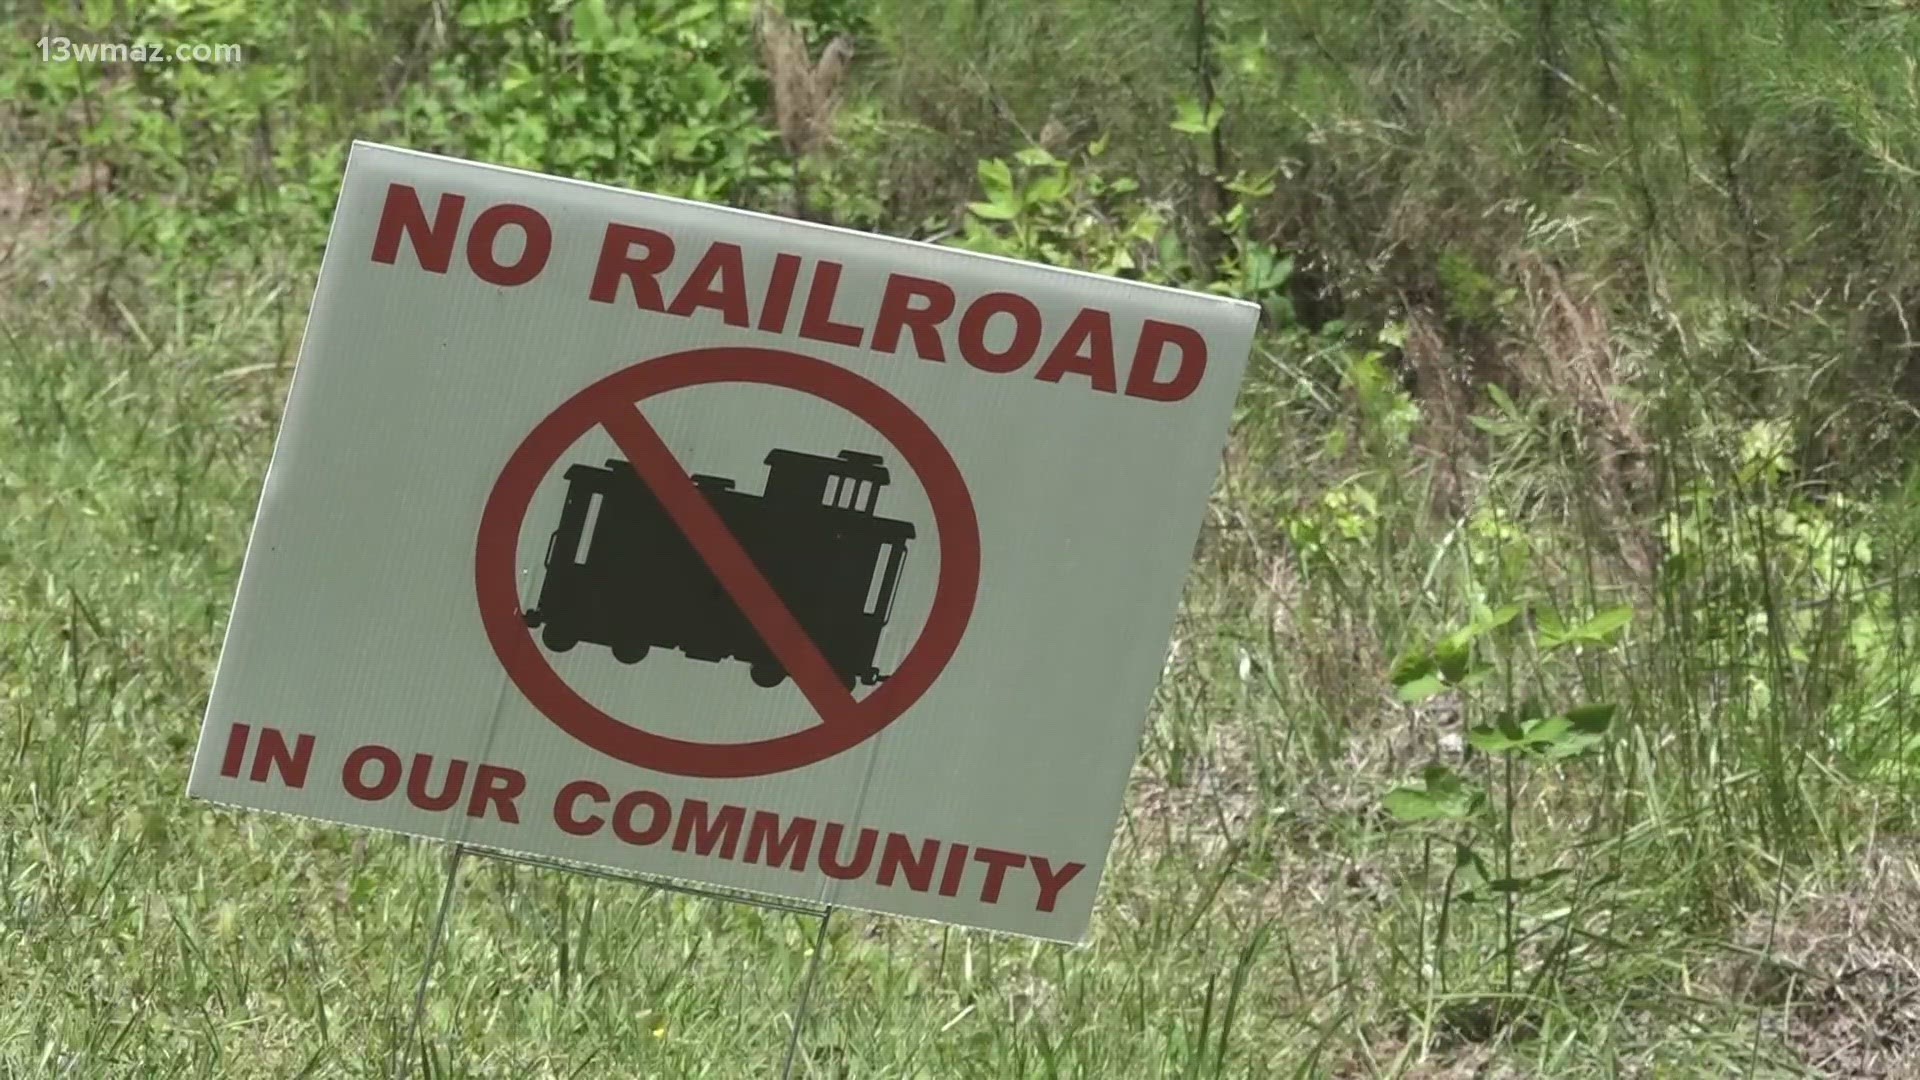 Families impacted by the rail line can appeal the ruling to the state commission.